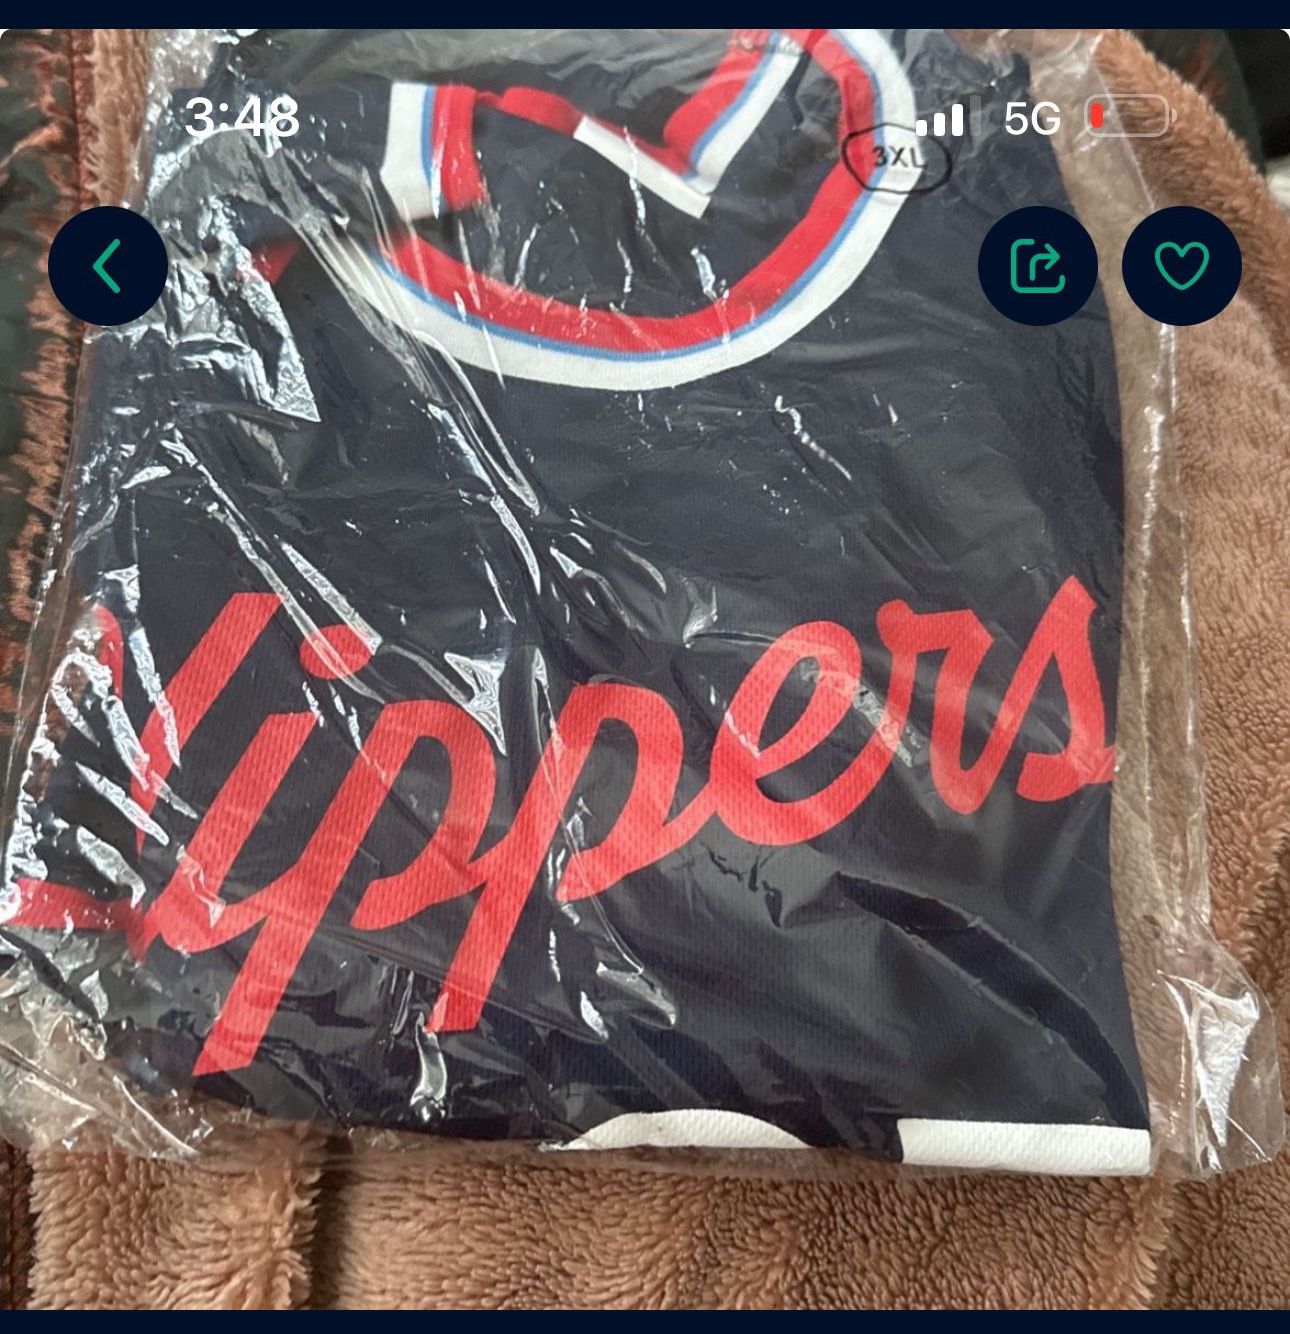 2025 Clippers Intuit Dome Jersey 